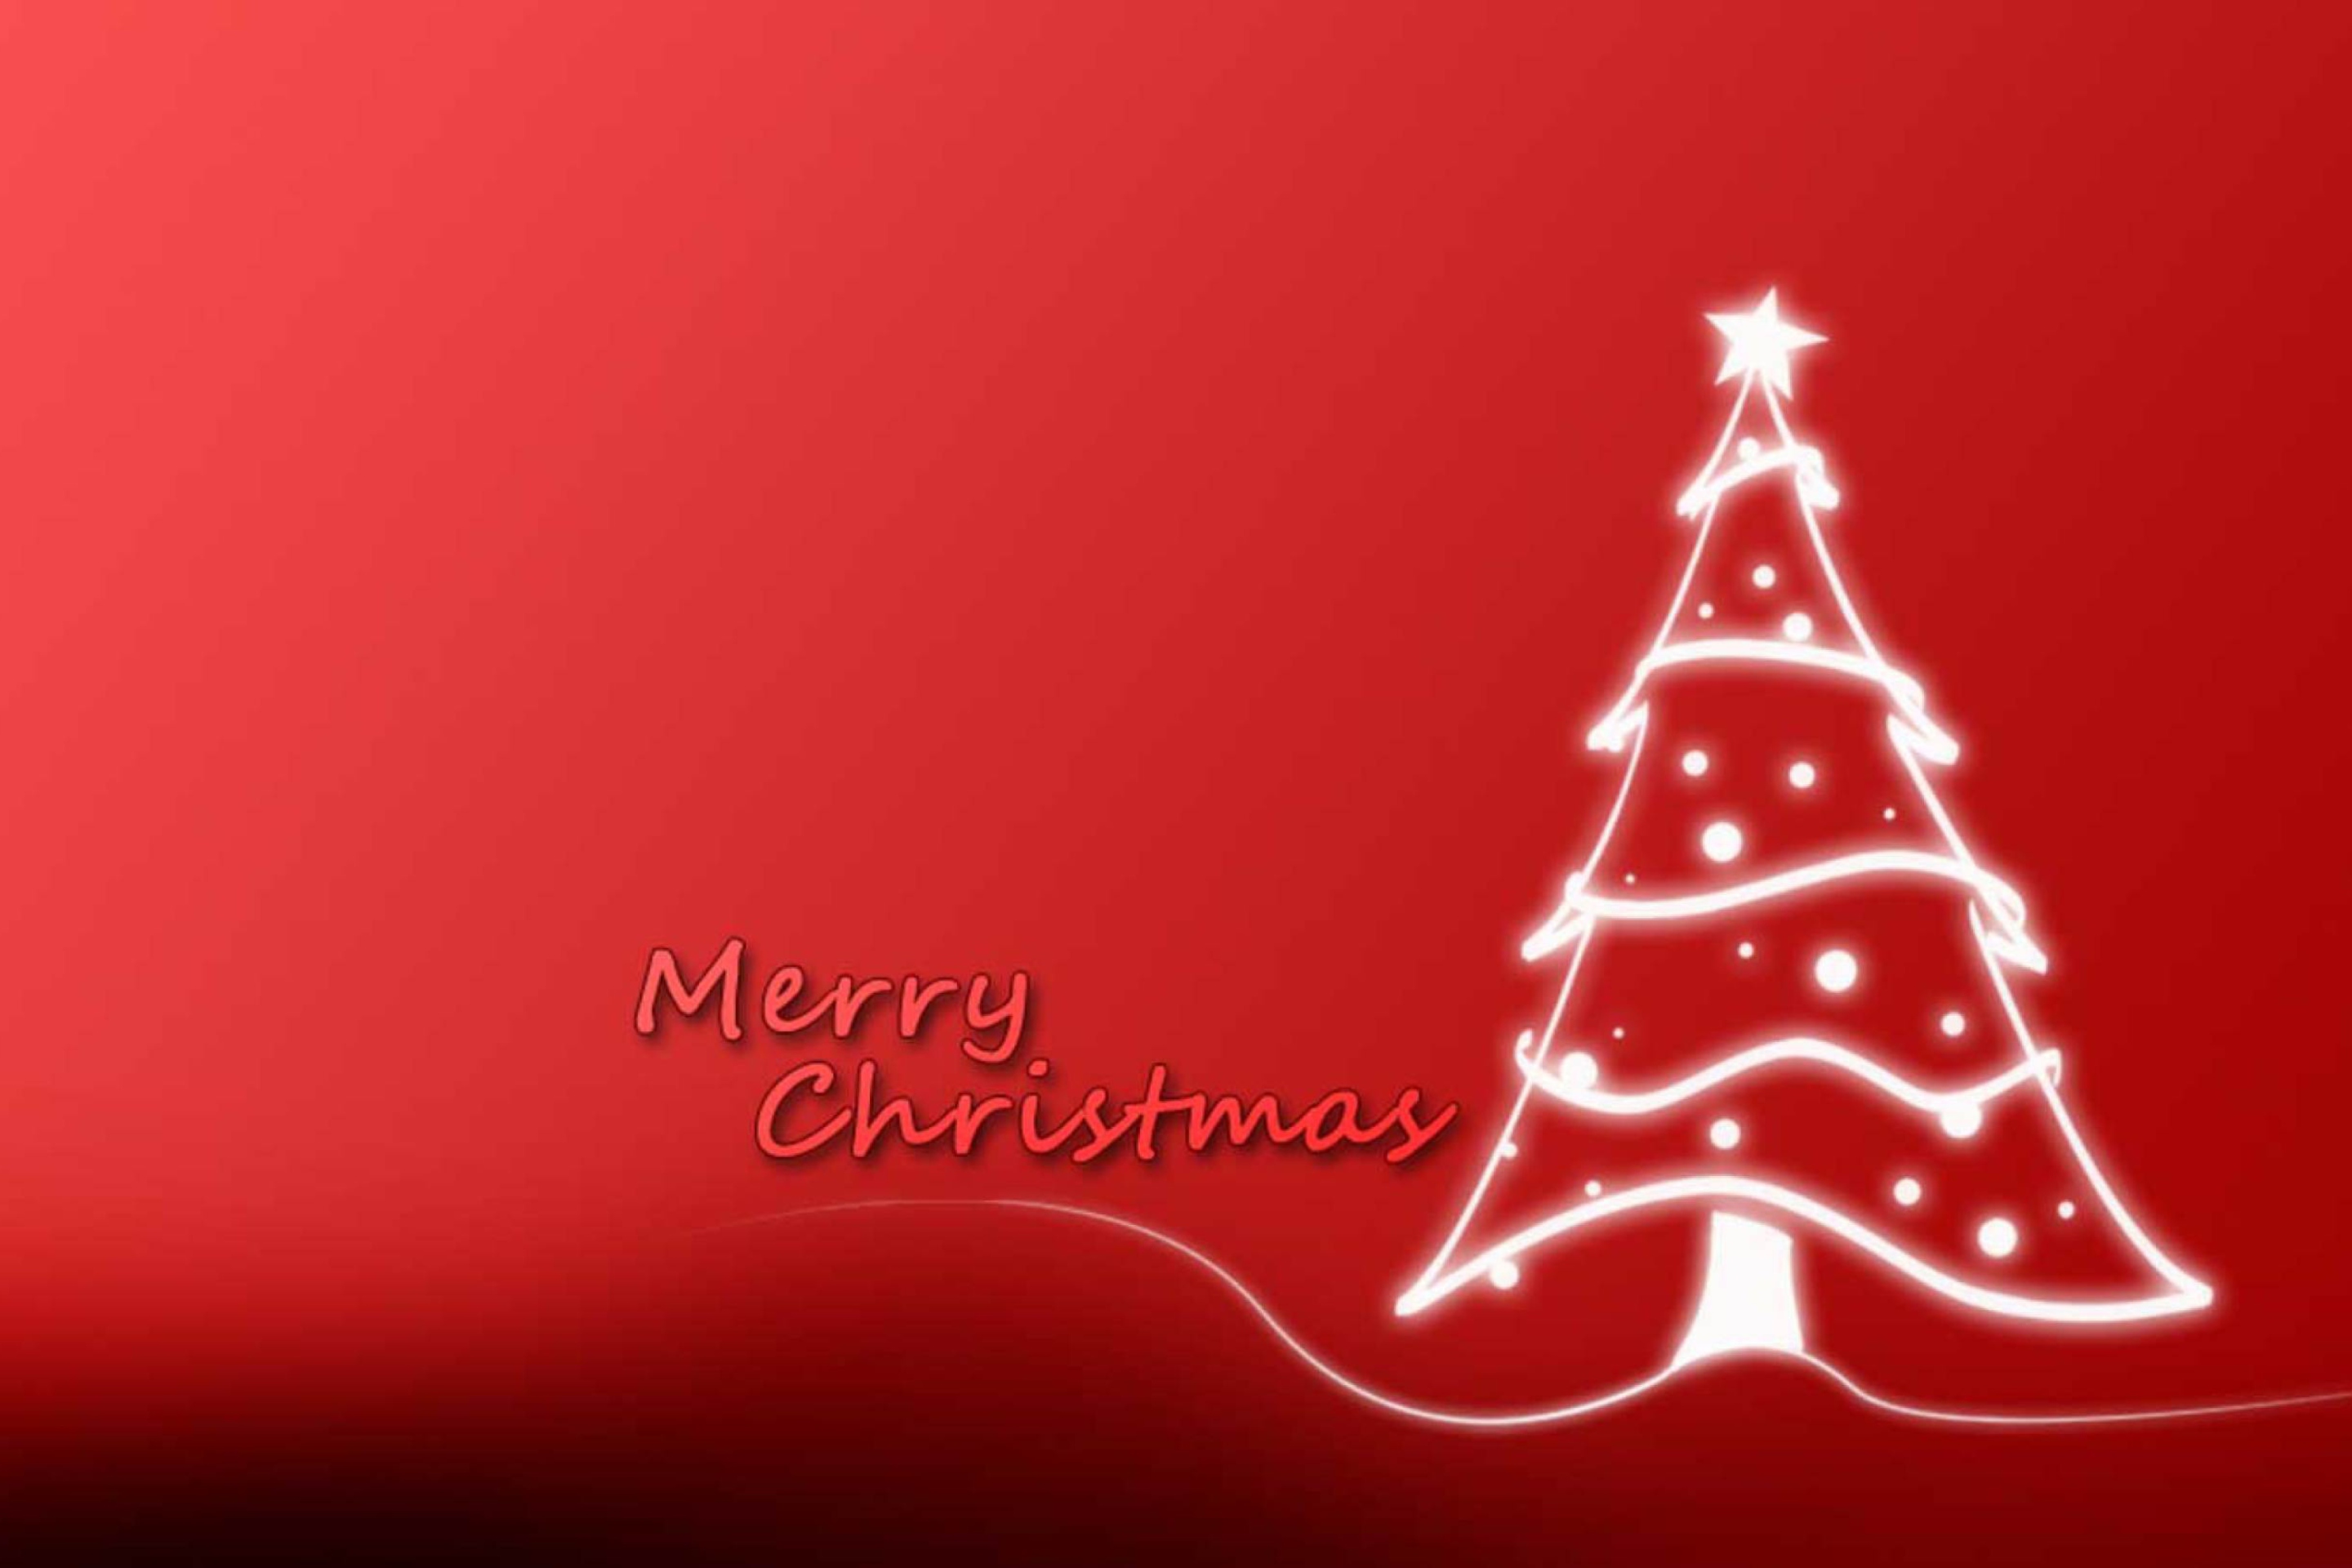 Das Christmas Red And White Tree Wallpaper 2880x1920